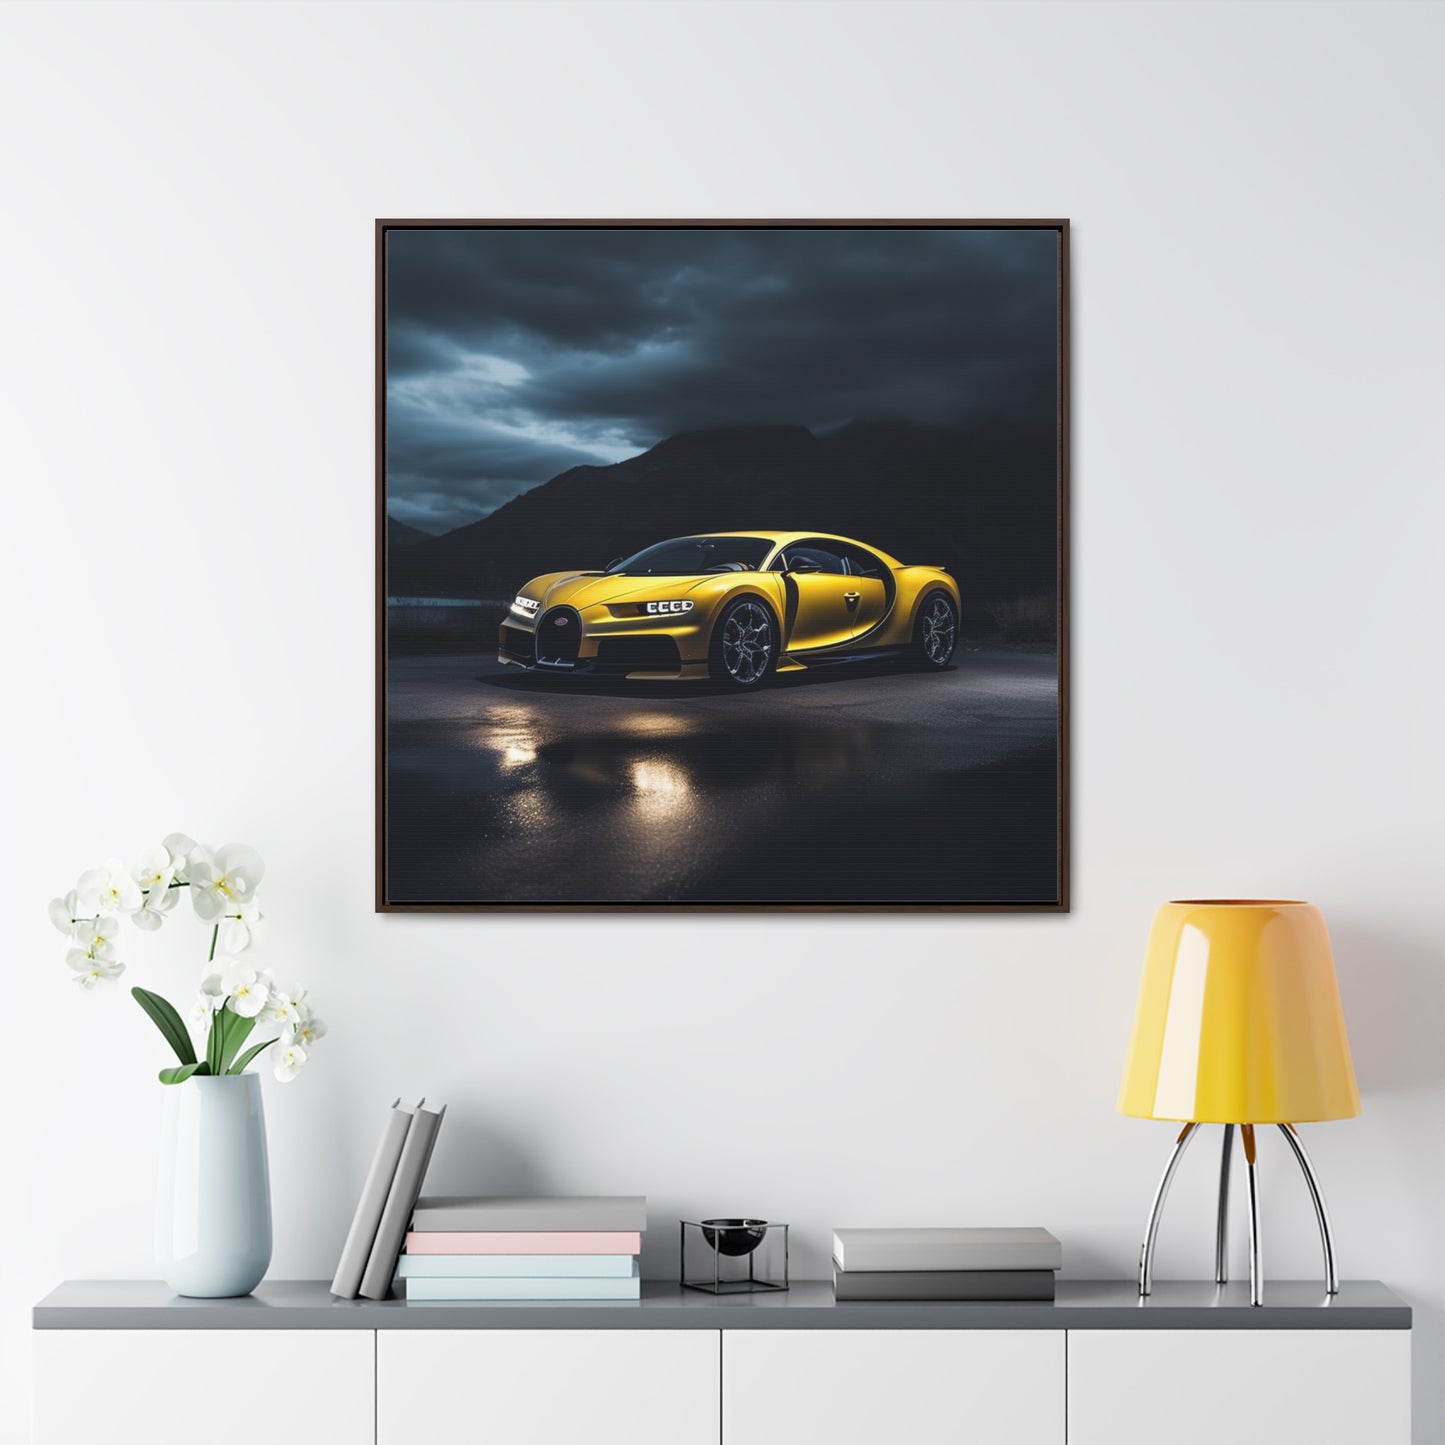 Gallery Canvas Wraps, Square Frame Bugatti Real Look 4